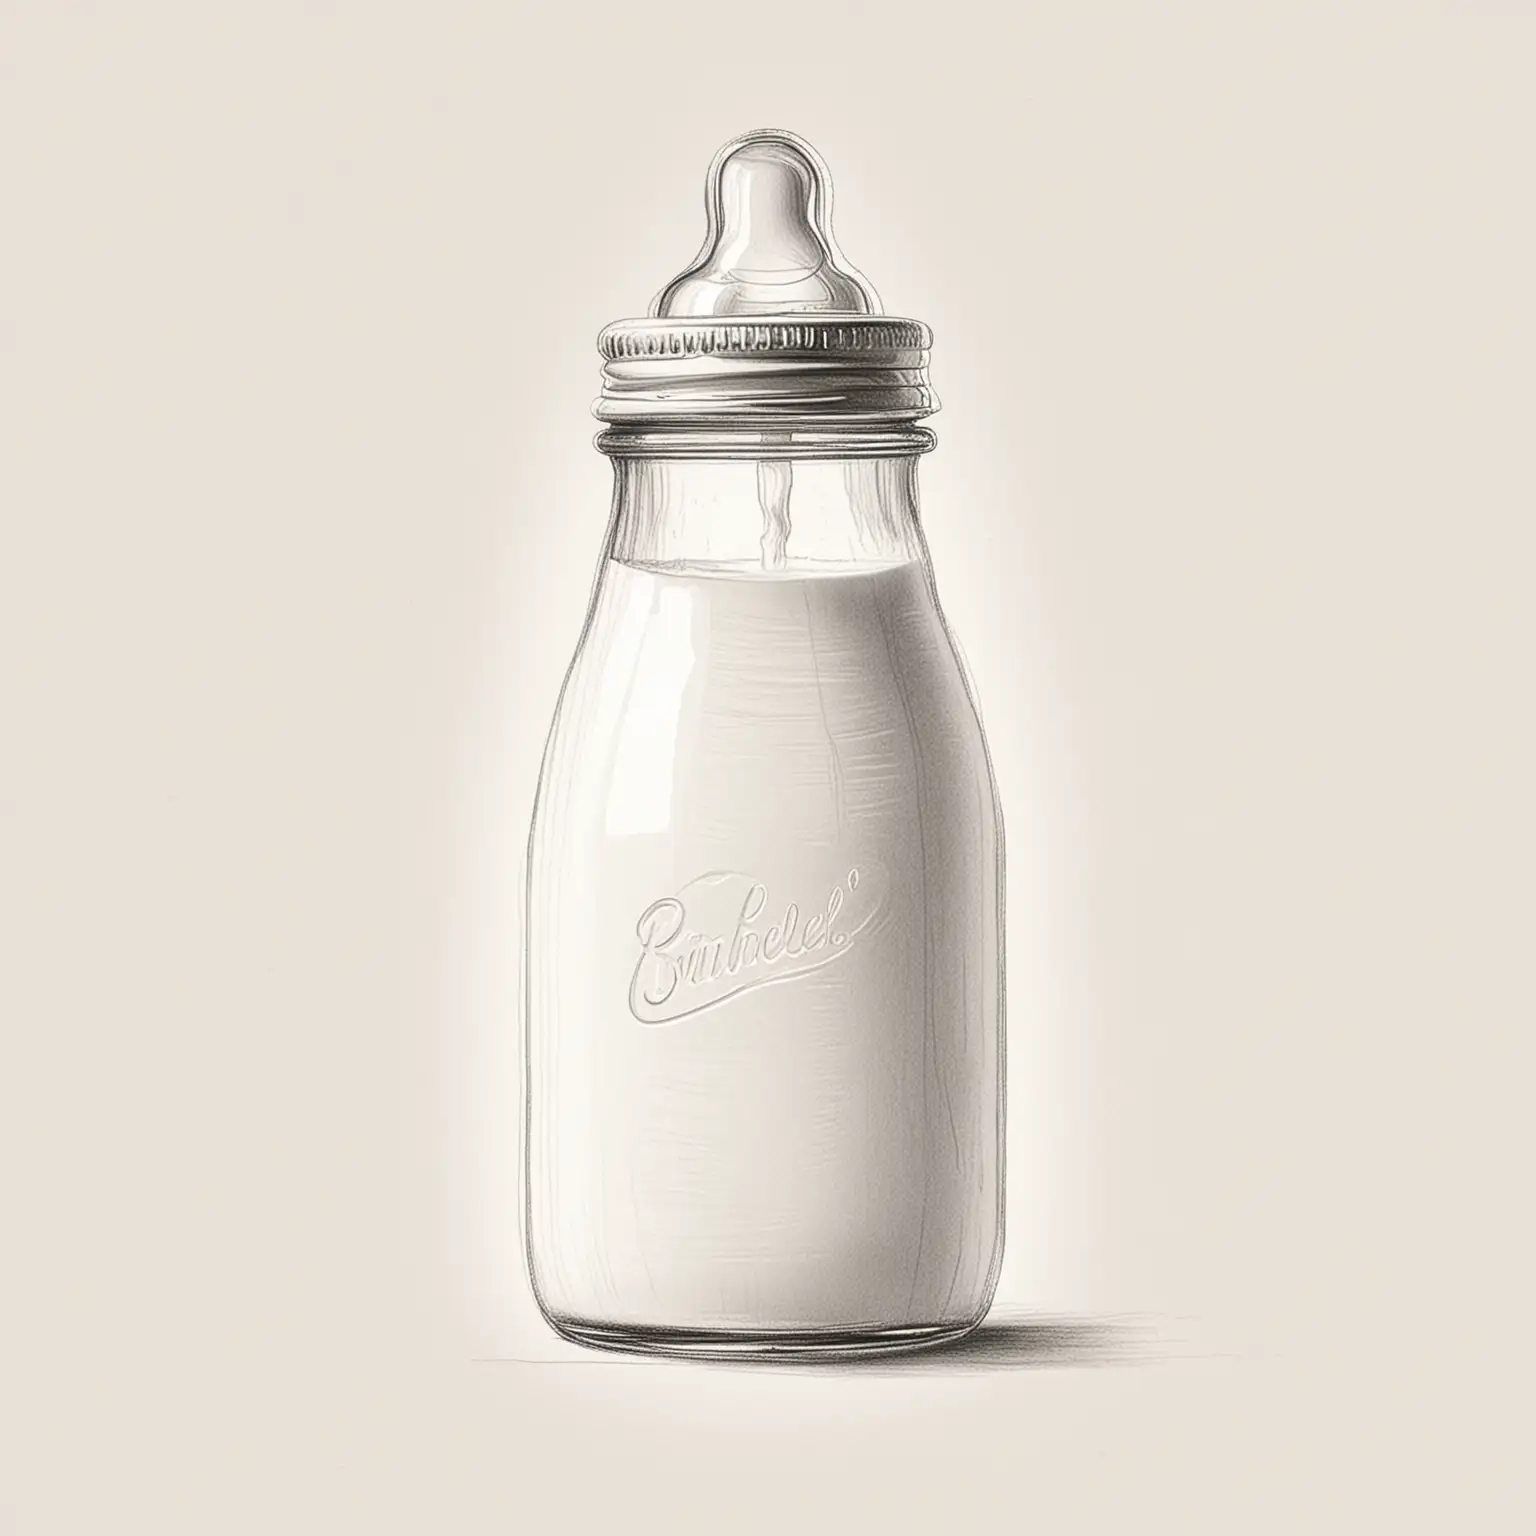 Minimalistic Pencil Sketch Baby Bottle Half Filled with Milk